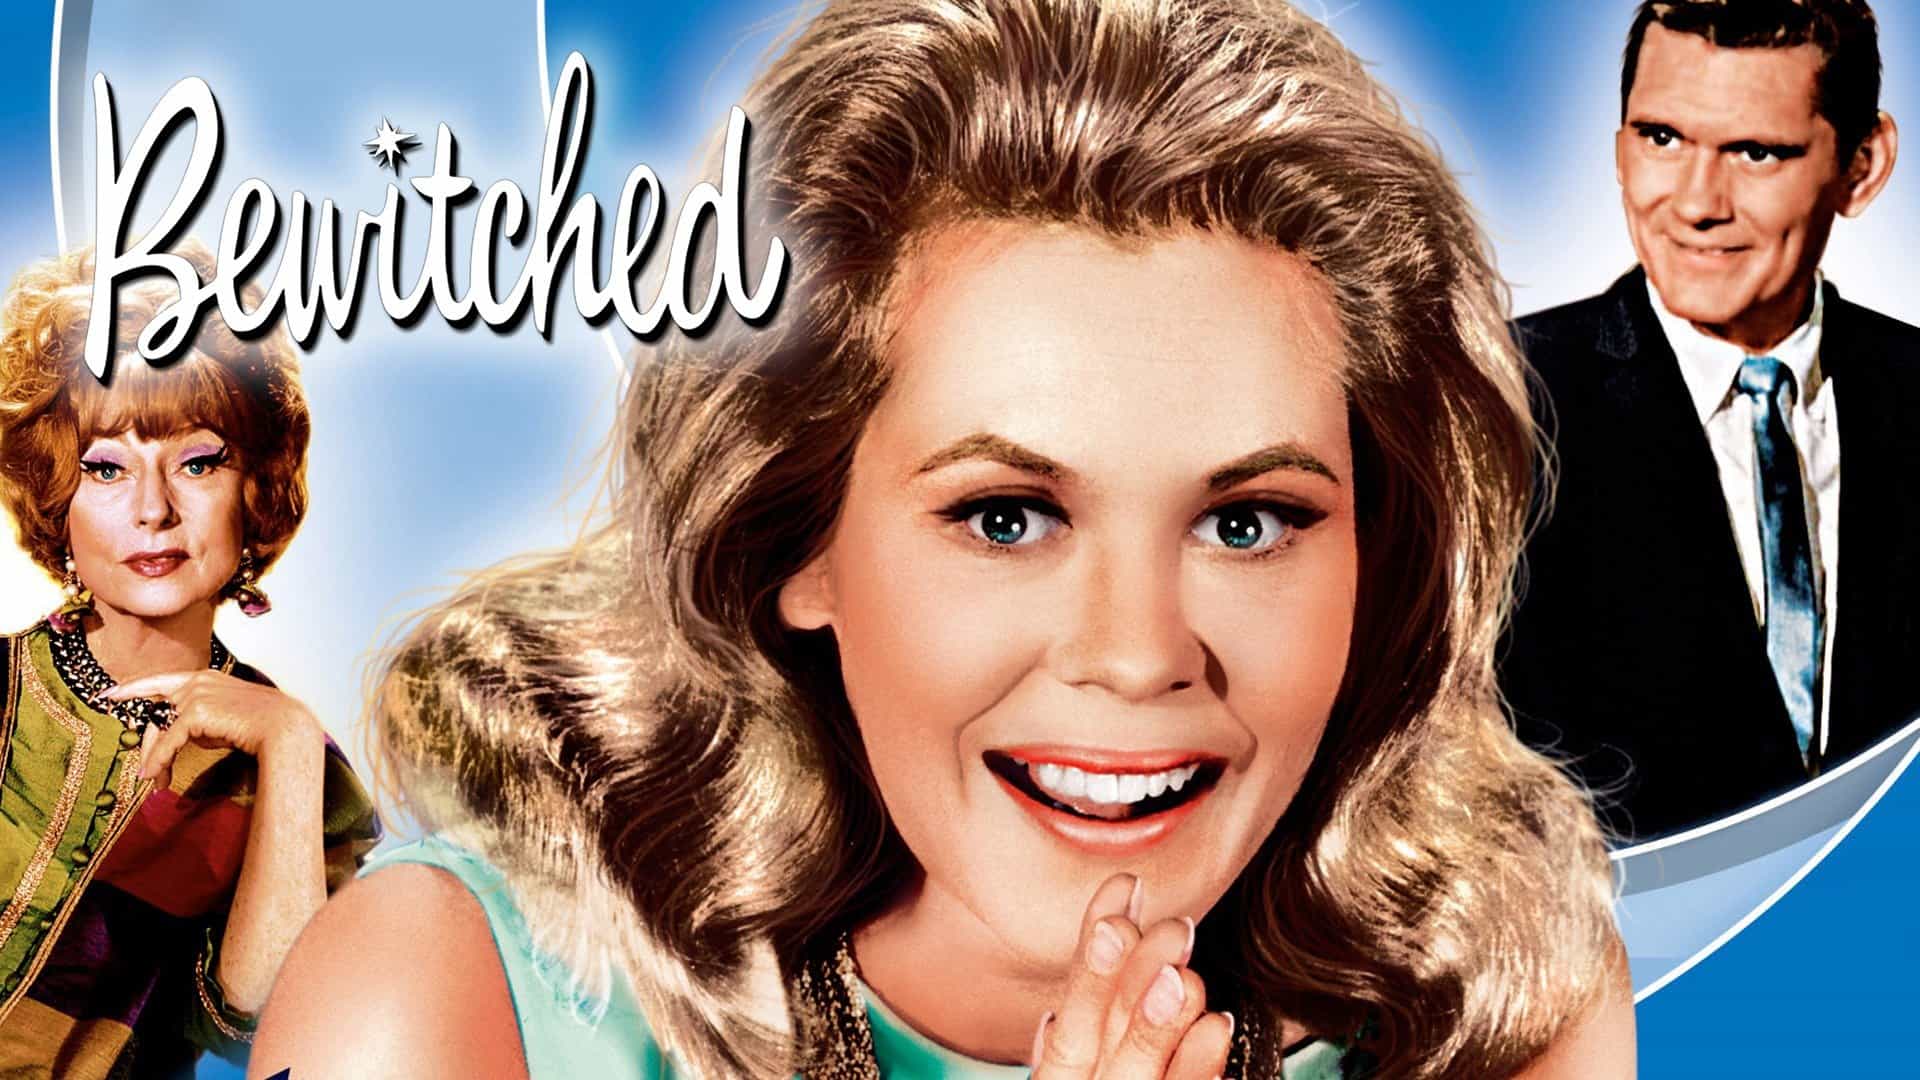 Bewitched series